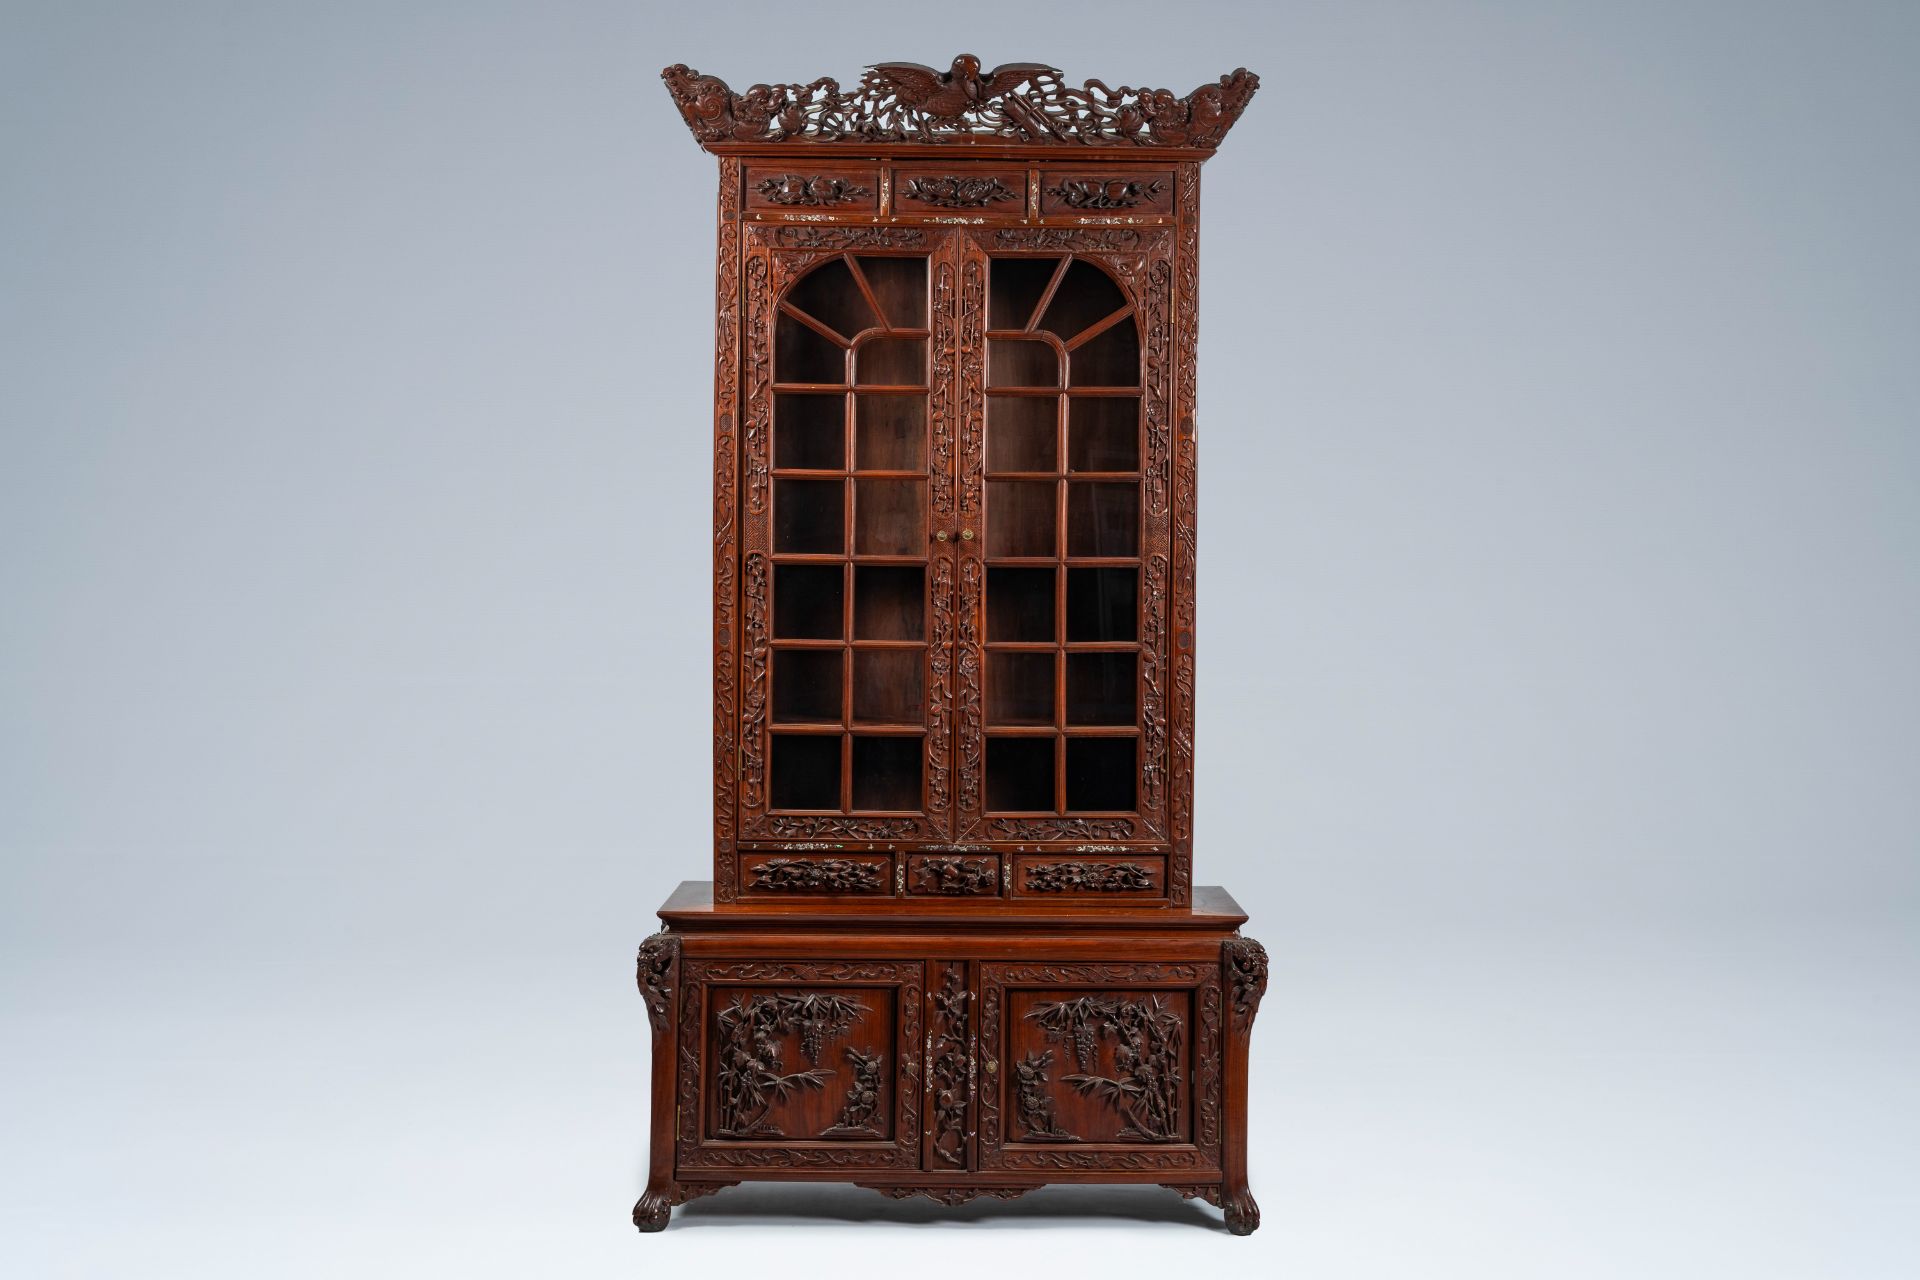 A Chinese or Vietnamese wooden four-door display cabinet with mother-of-pearl inlay, ca. 1900 - Image 2 of 15